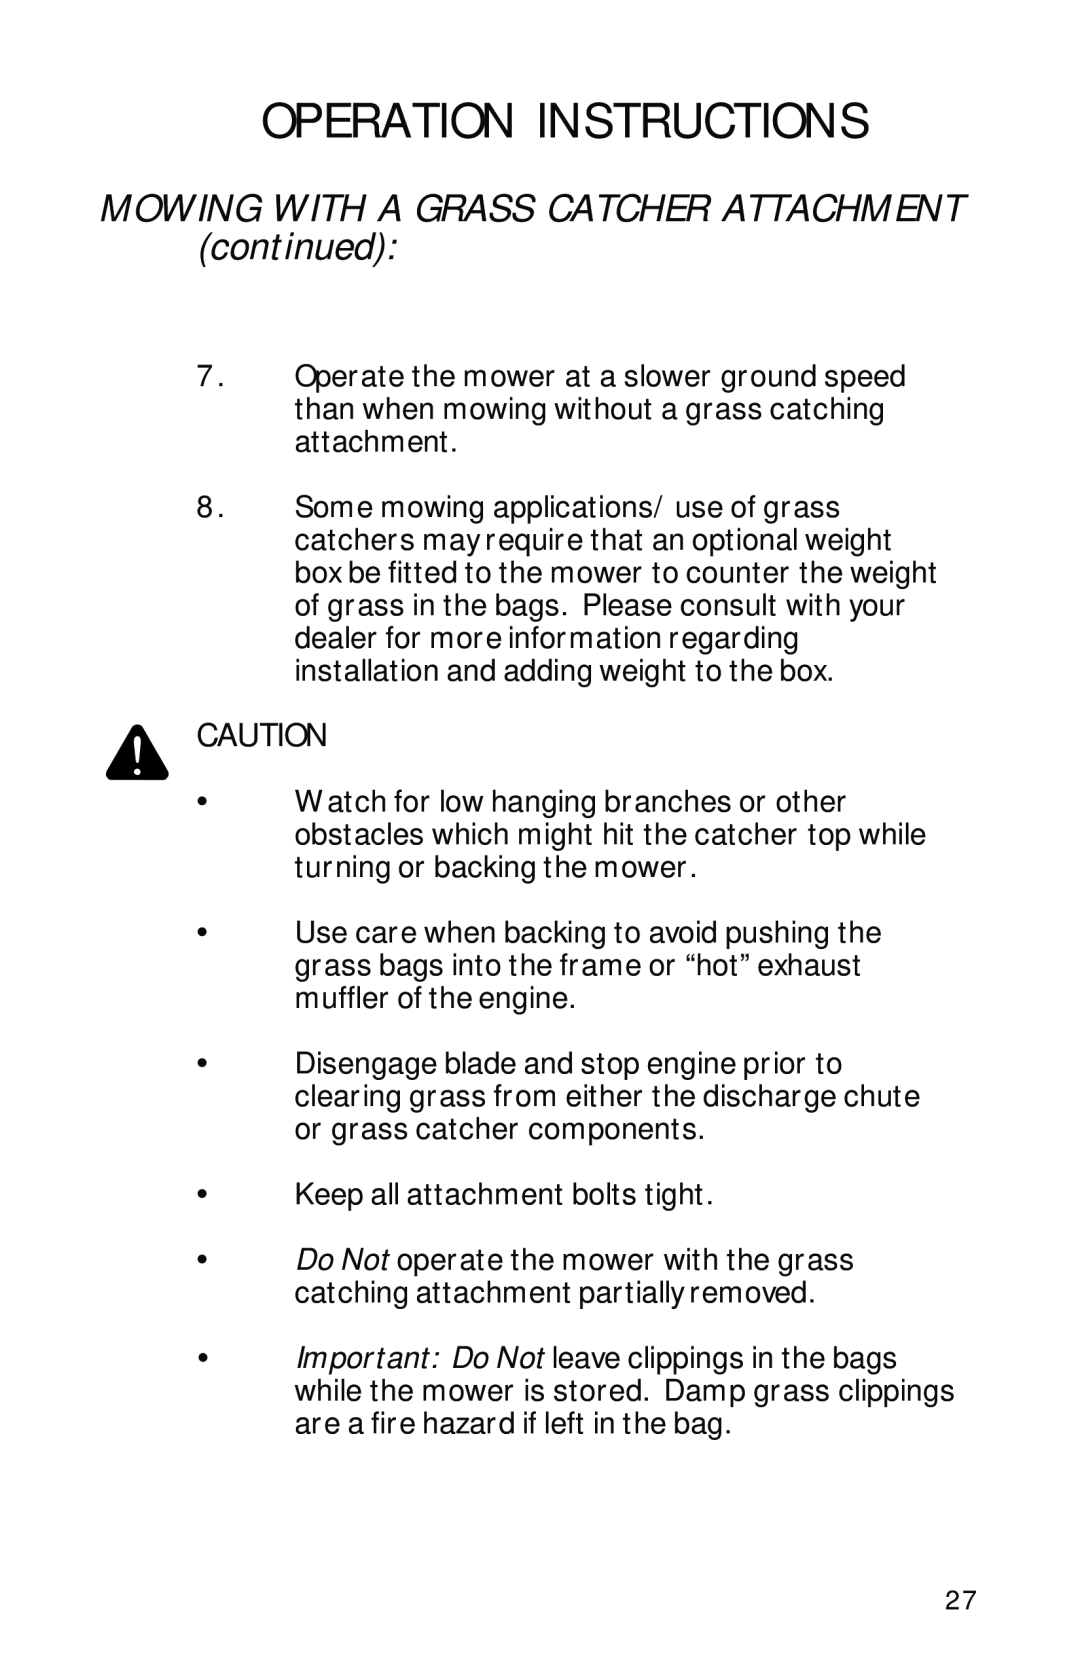 Dixon ZTR 2002 manual MOWING WITH A GRASS CATCHER ATTACHMENT continued, Operation Instructions 